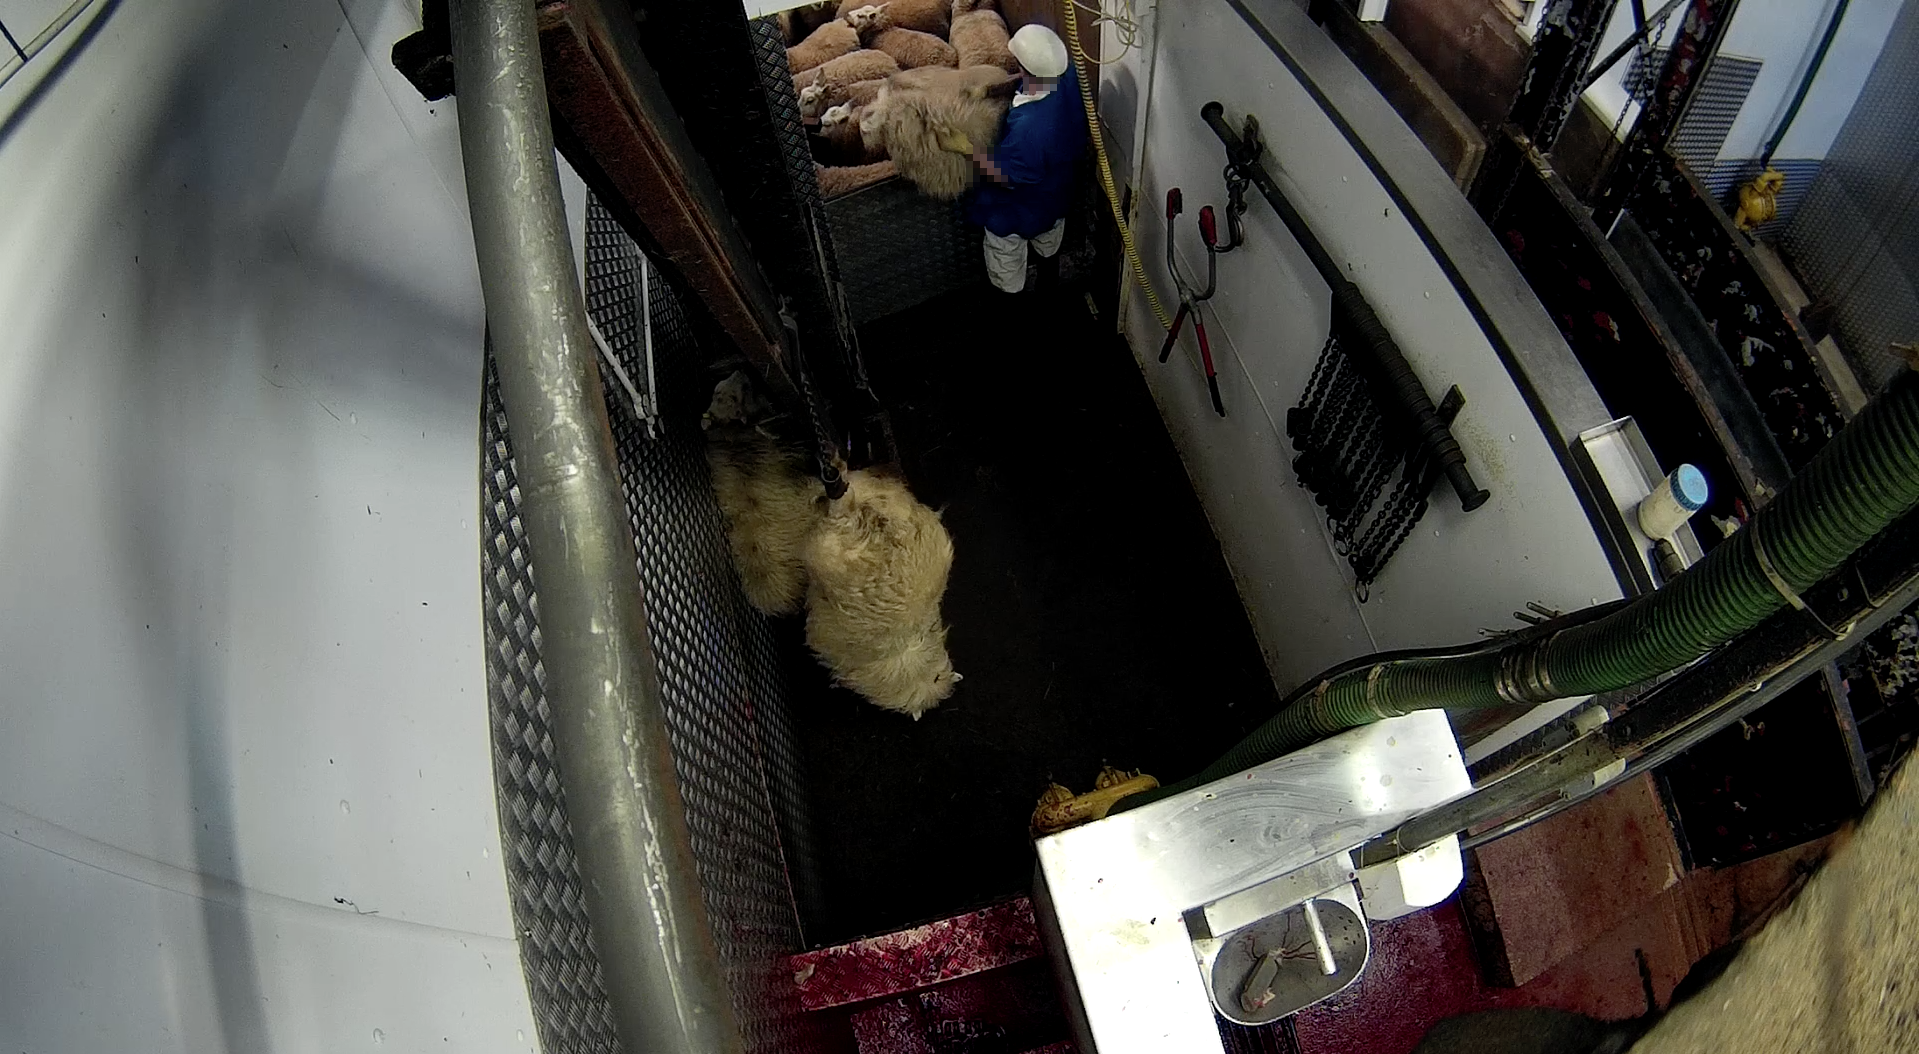 Calls for tough action against cruelty in Stockport slaughterhouse - Animal  Aid